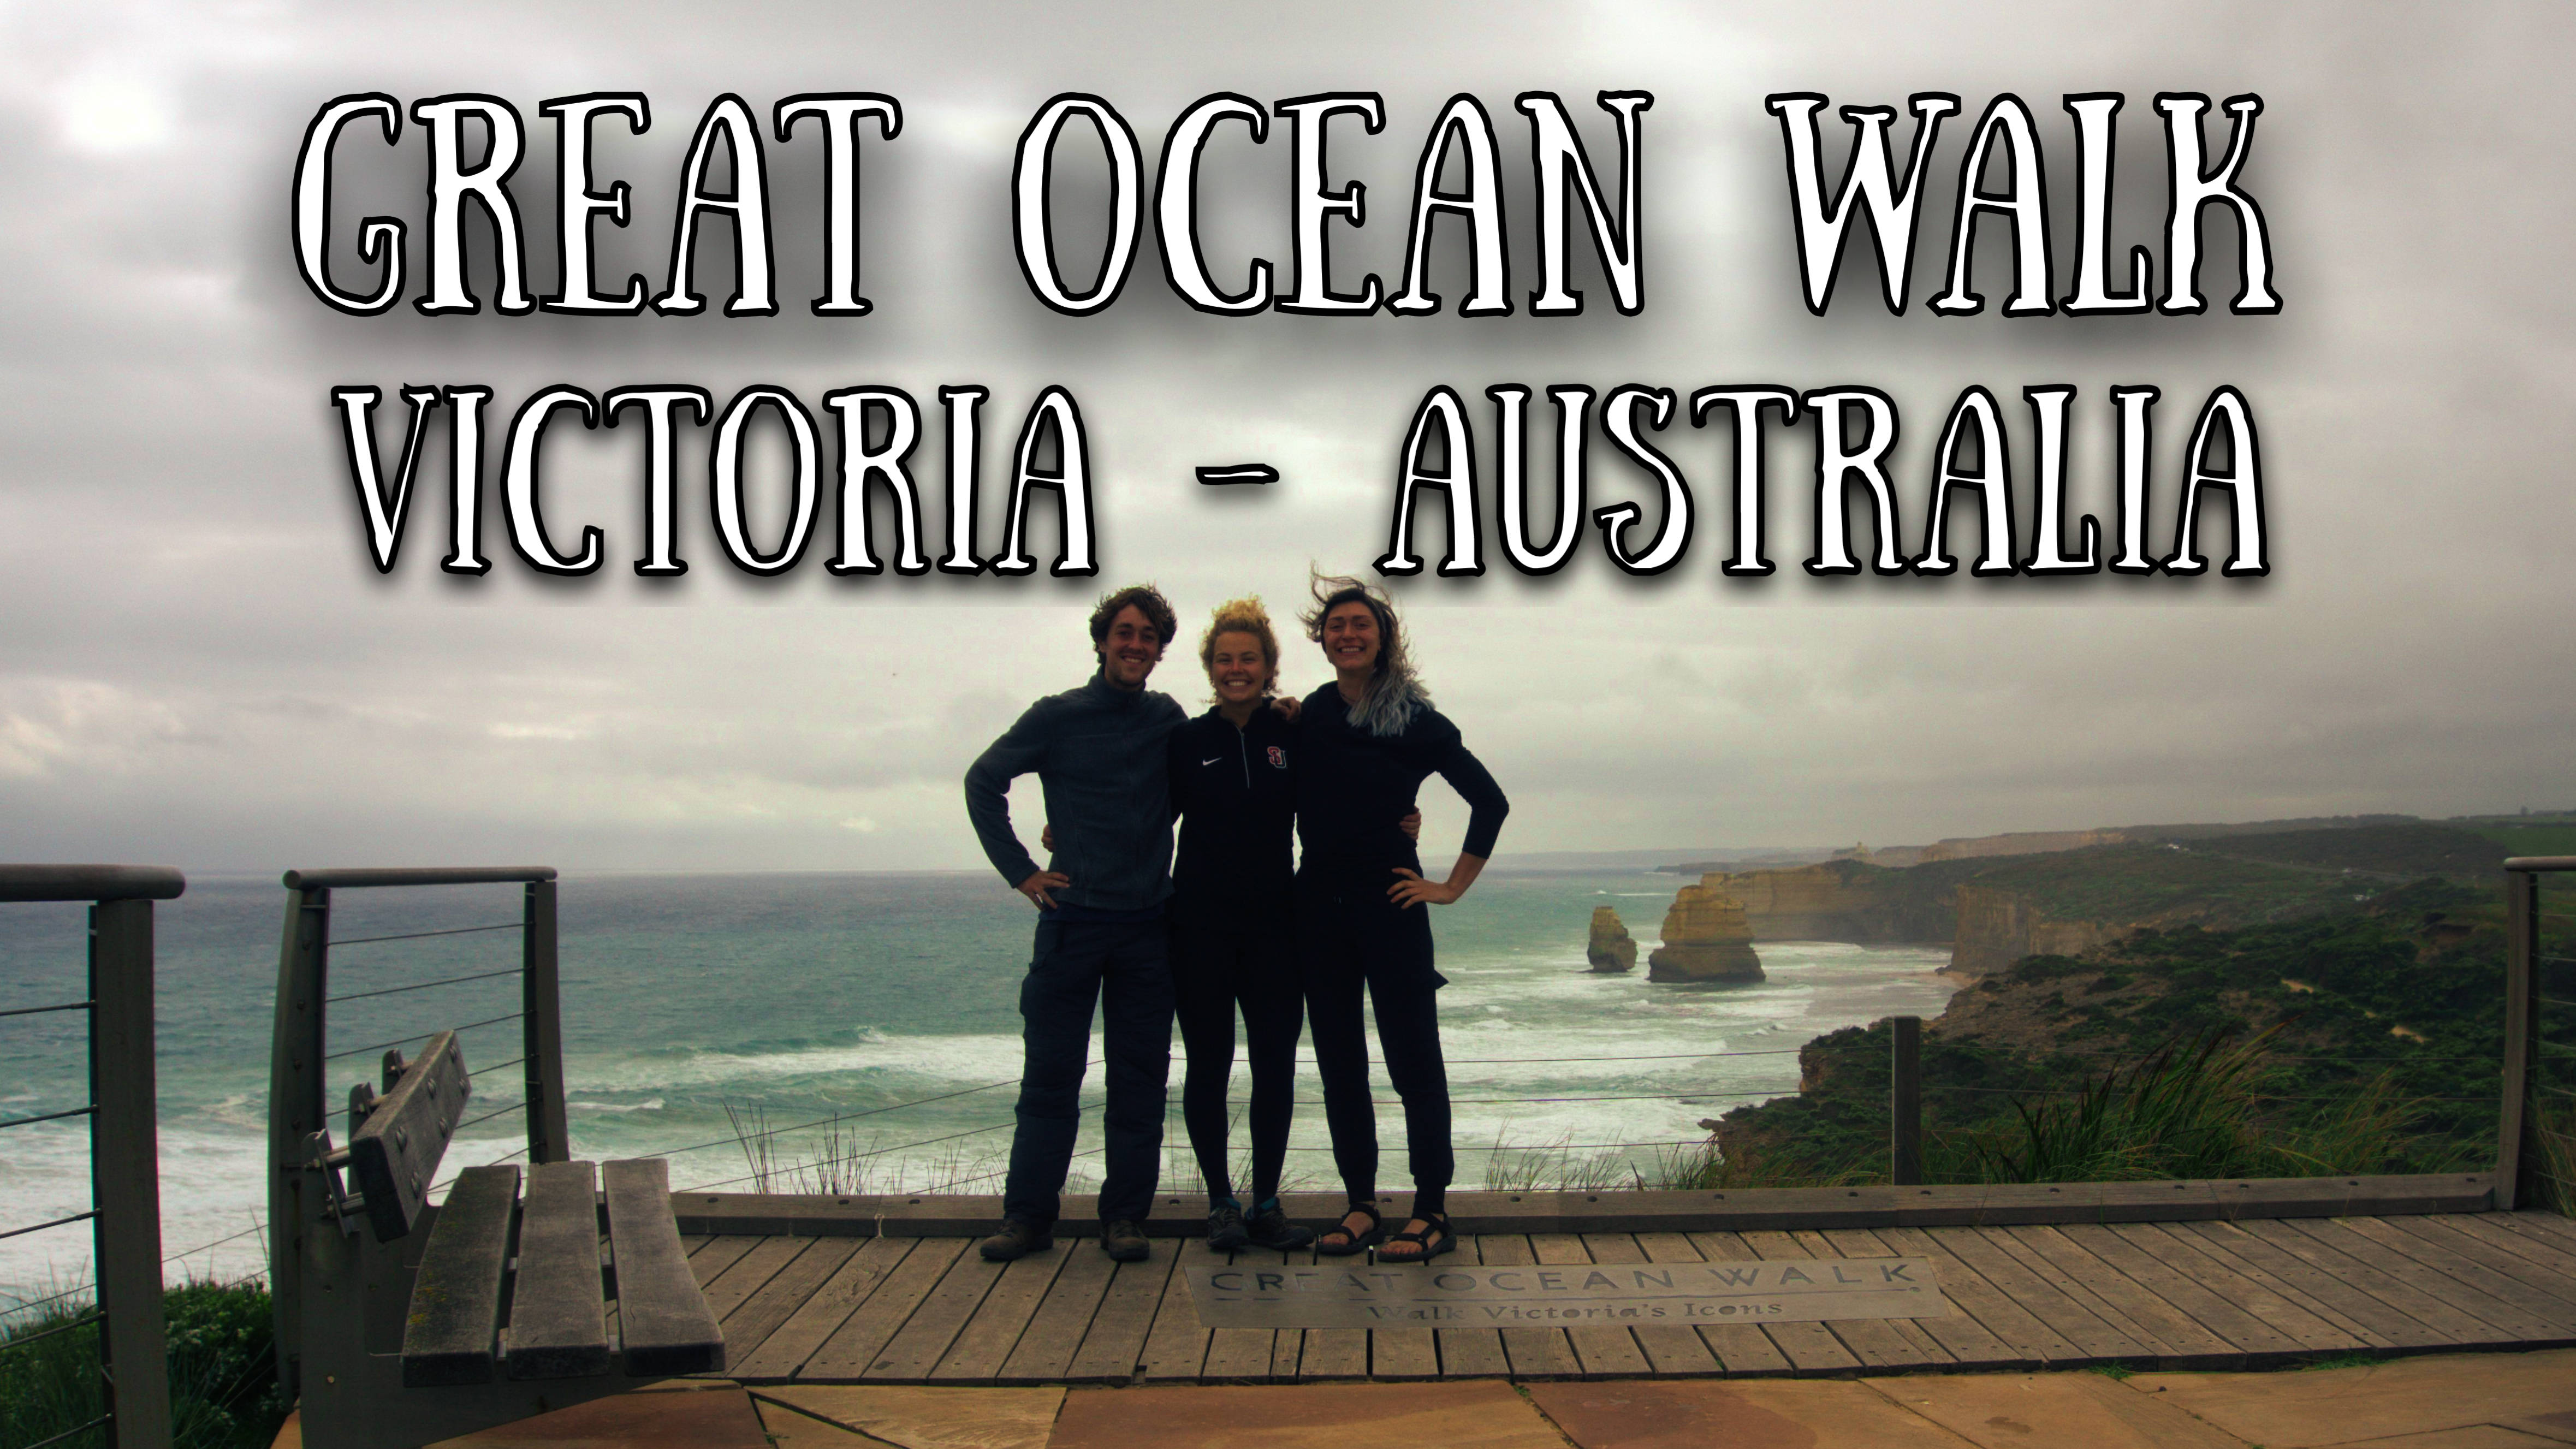 Group Picture of the Great Ocean Walk at the Twelve Apostles